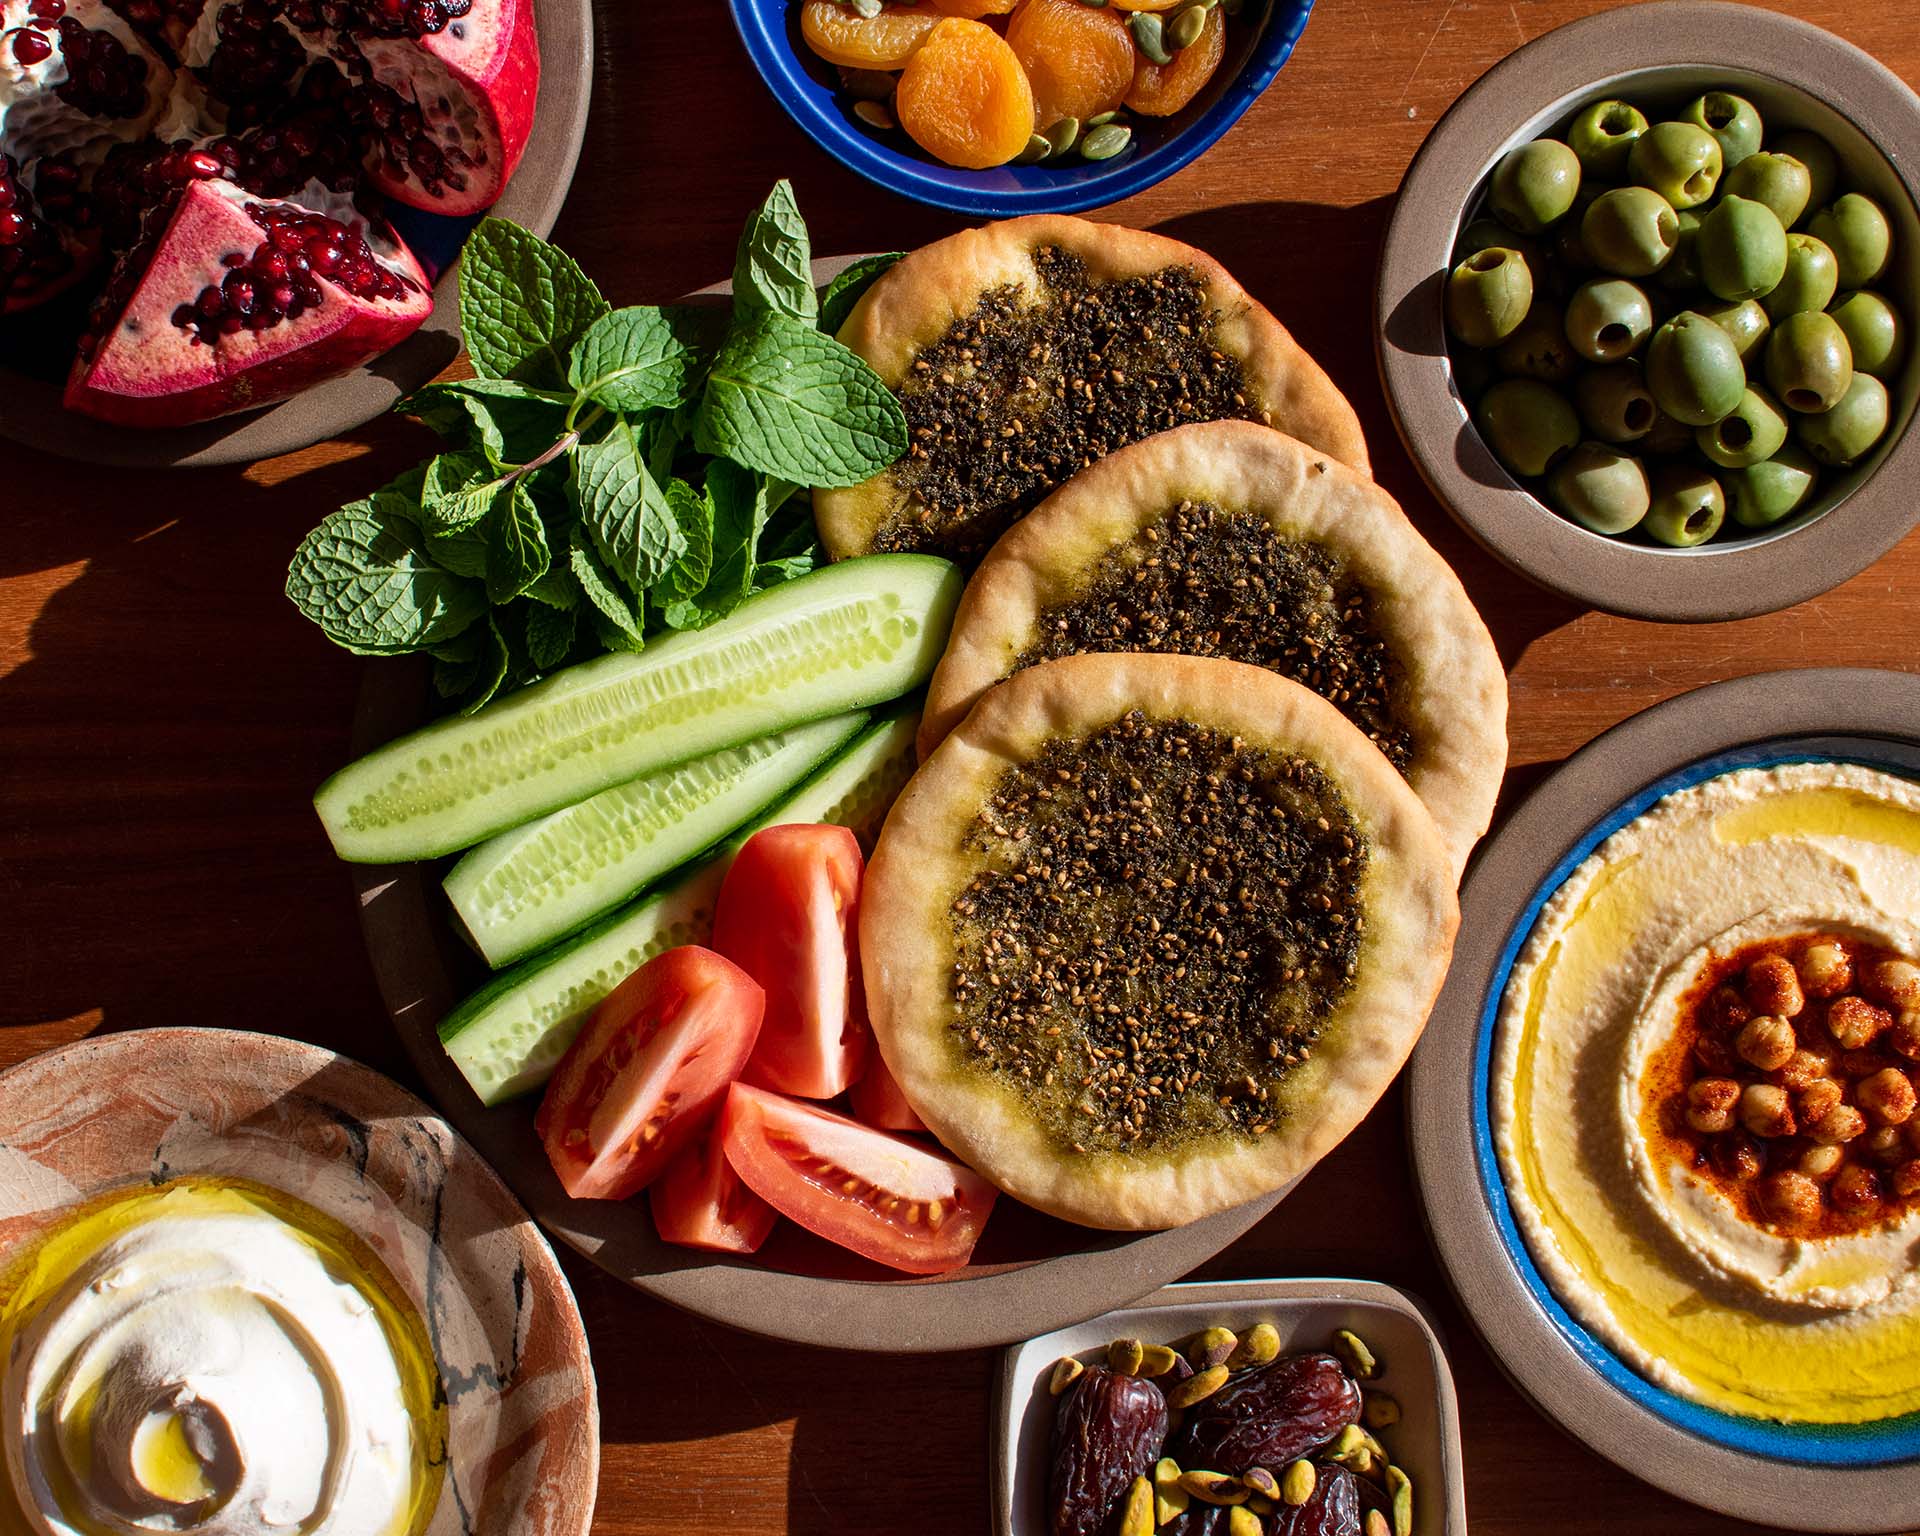 A spread of bread, olives, raw vegetable, and dips.